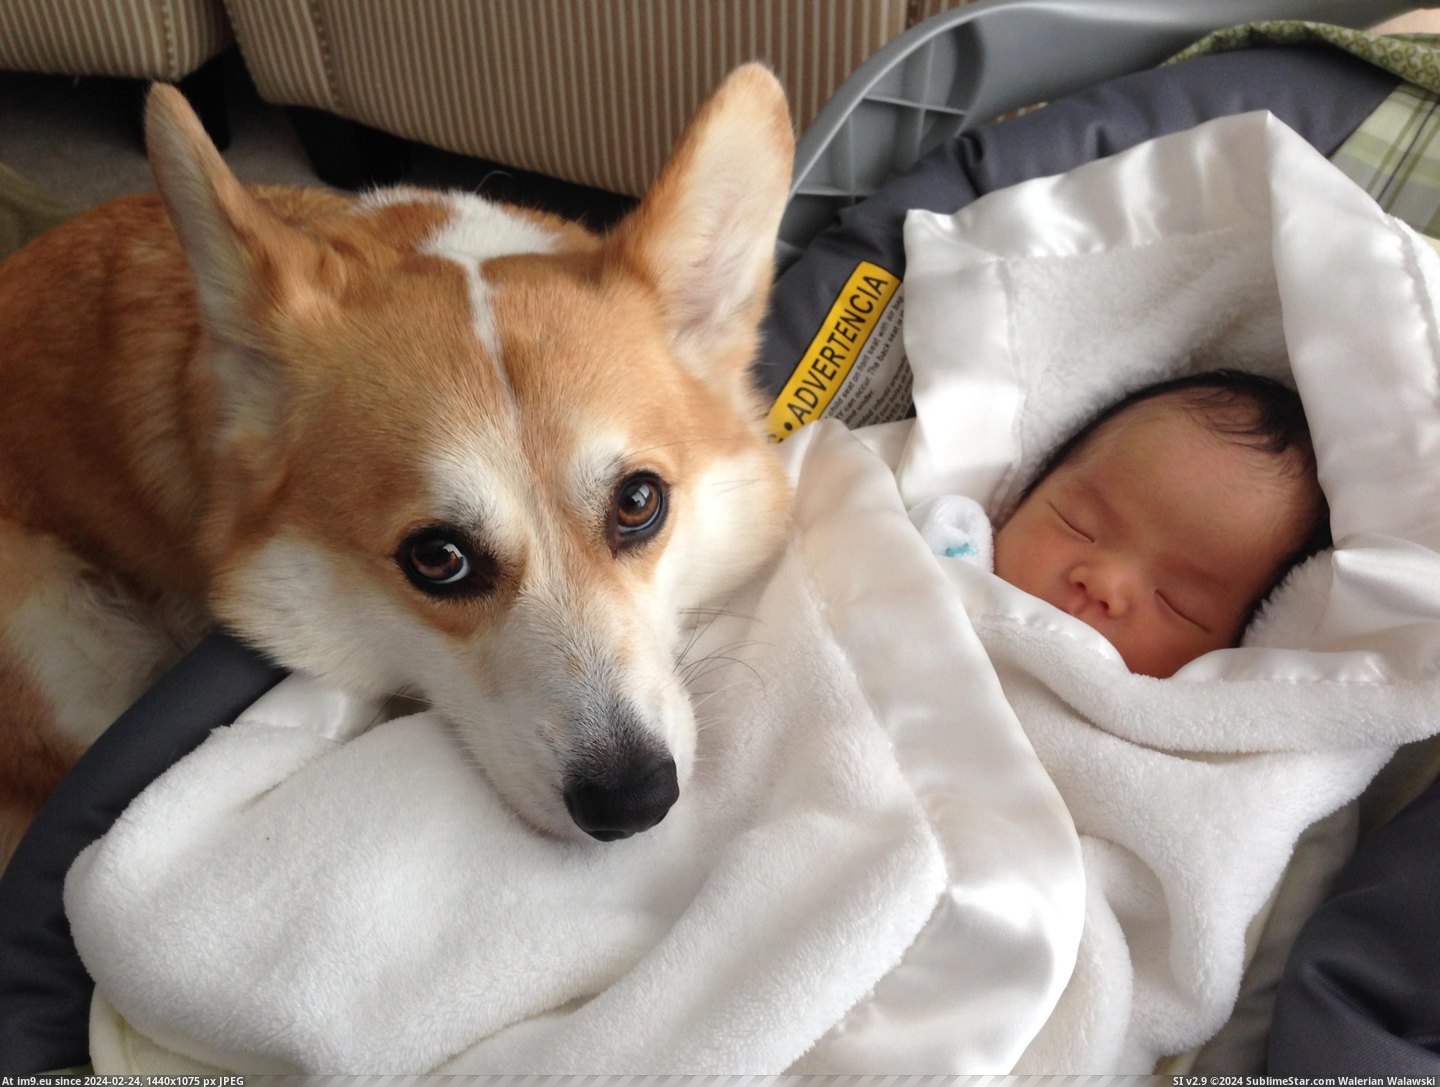 #Was #New #Ago #But #How #Daughter #Weeks #Born [Aww] My daughter was born three weeks ago. I worried about how my corgi would react but he's treating her like his new BFF... 1 Pic. (Изображение из альбом My r/AWW favs))